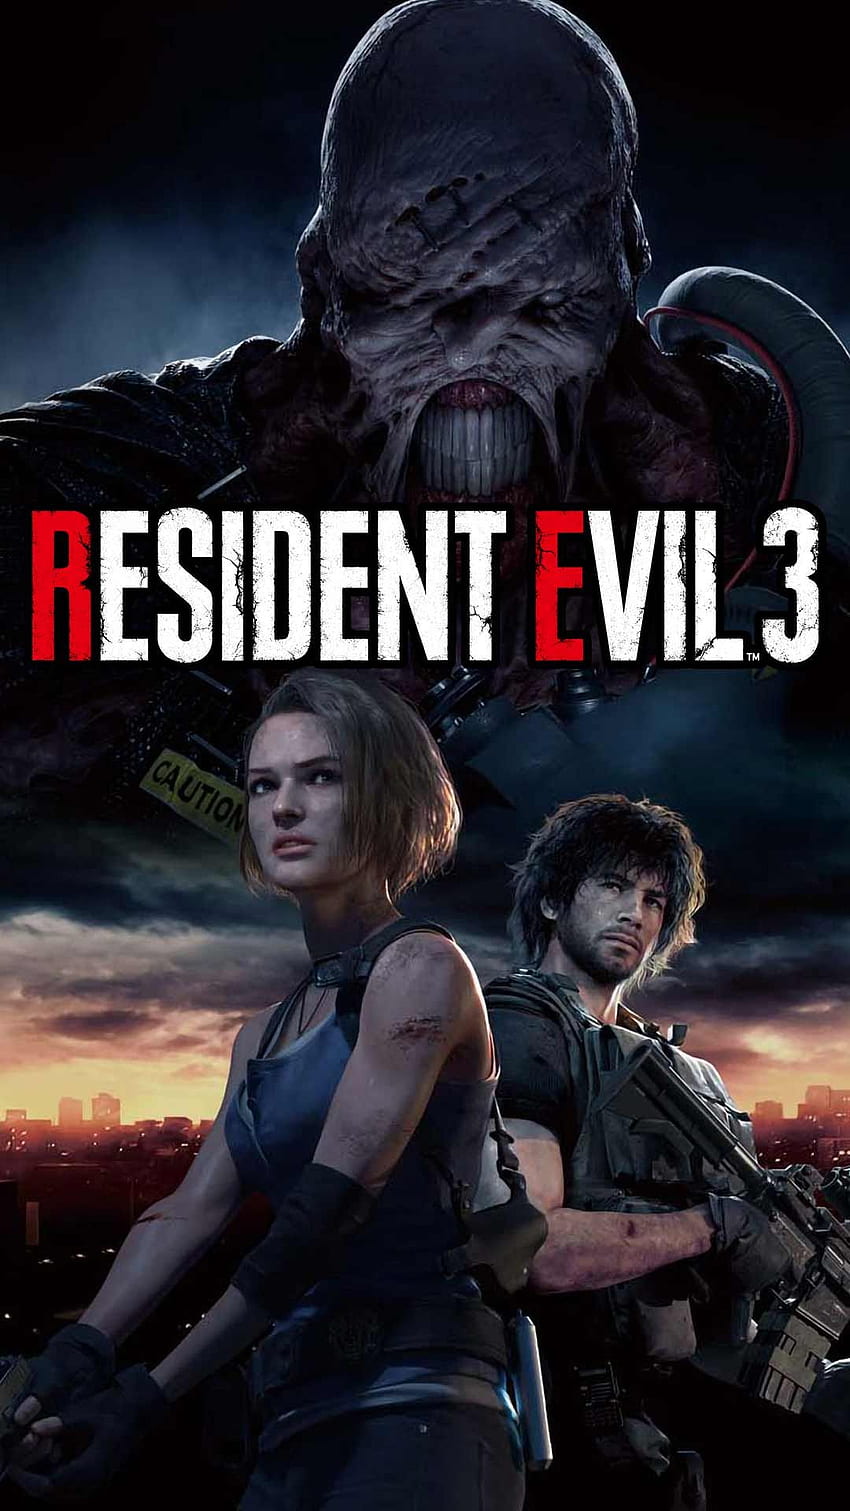 Resident evil 3 remake phone background 2020 PS4 game art Poster su iPhone Android. Remake di Resident Evil 3, Resident Evil, Gioco di Resident Evil, Resident Evil 3 Phone Sfondo del telefono HD